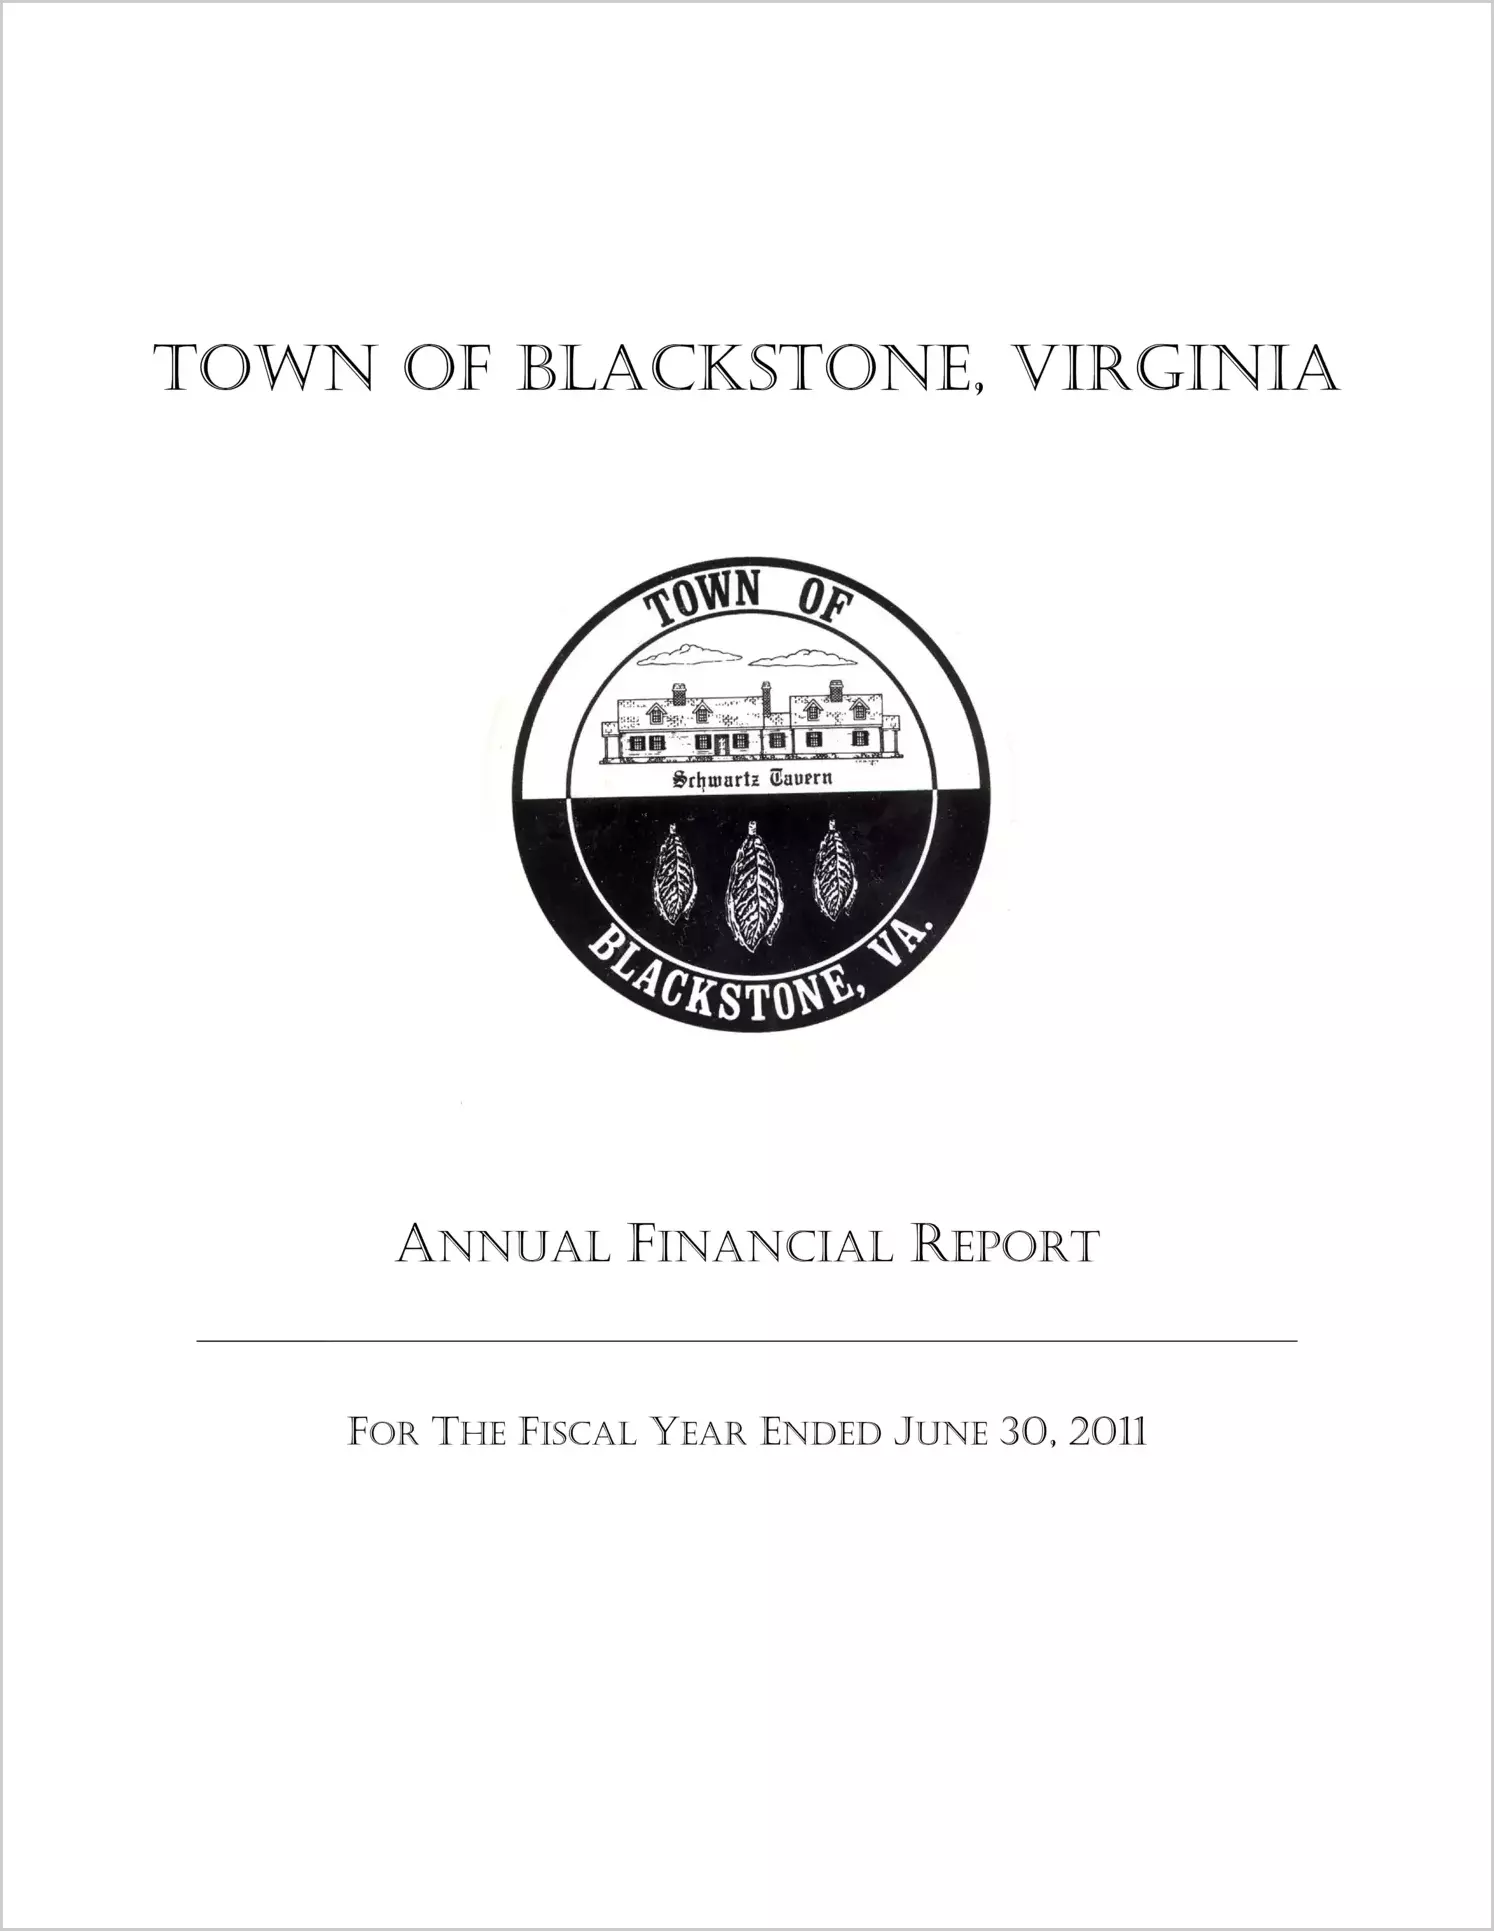 2011 Annual Financial Report for Town of Blackstone